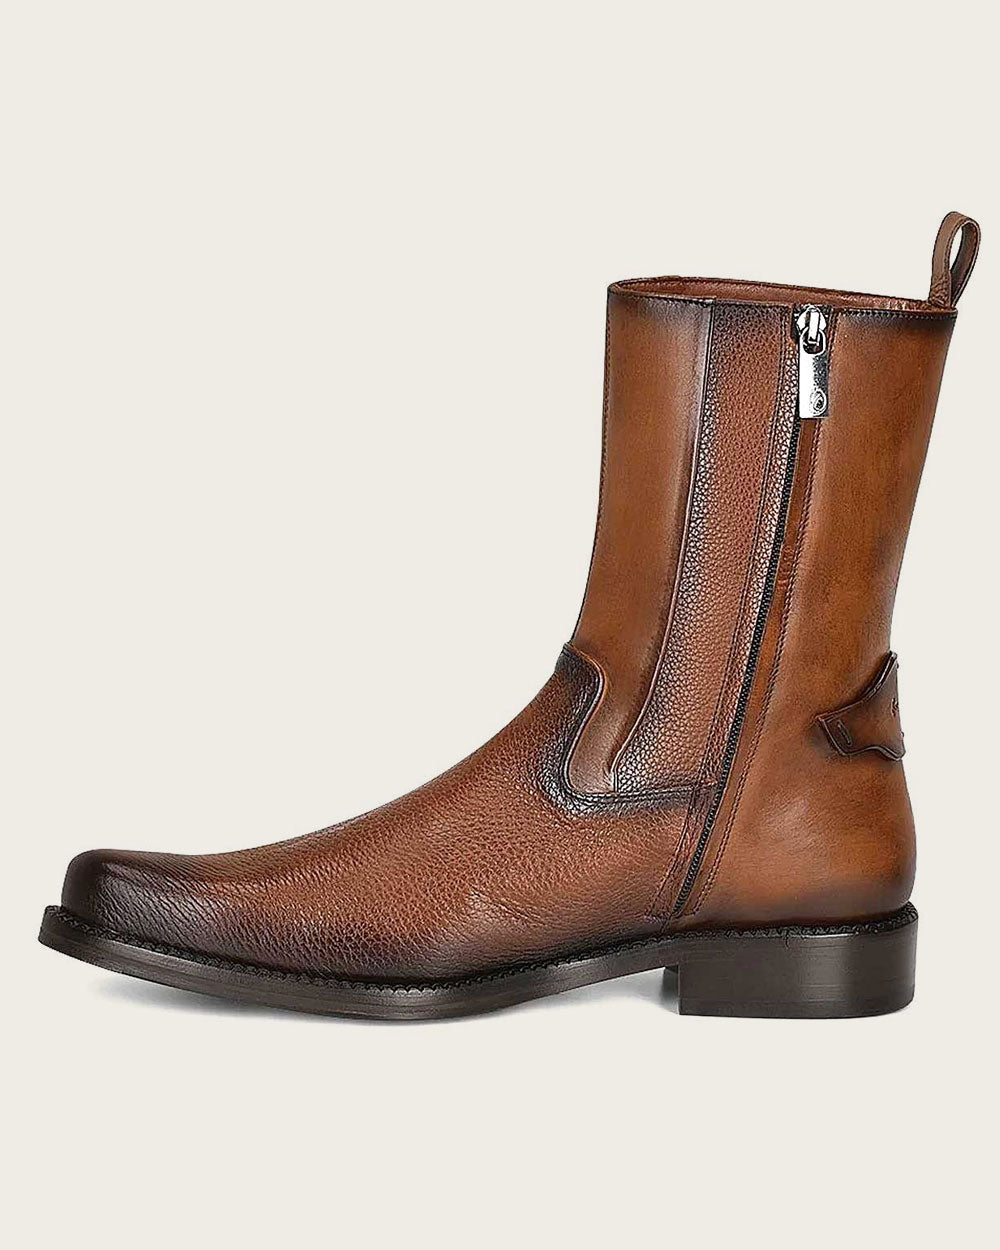 Luxury, Not Rough Use: Invest in Cuadra's deer leather dress boots. 